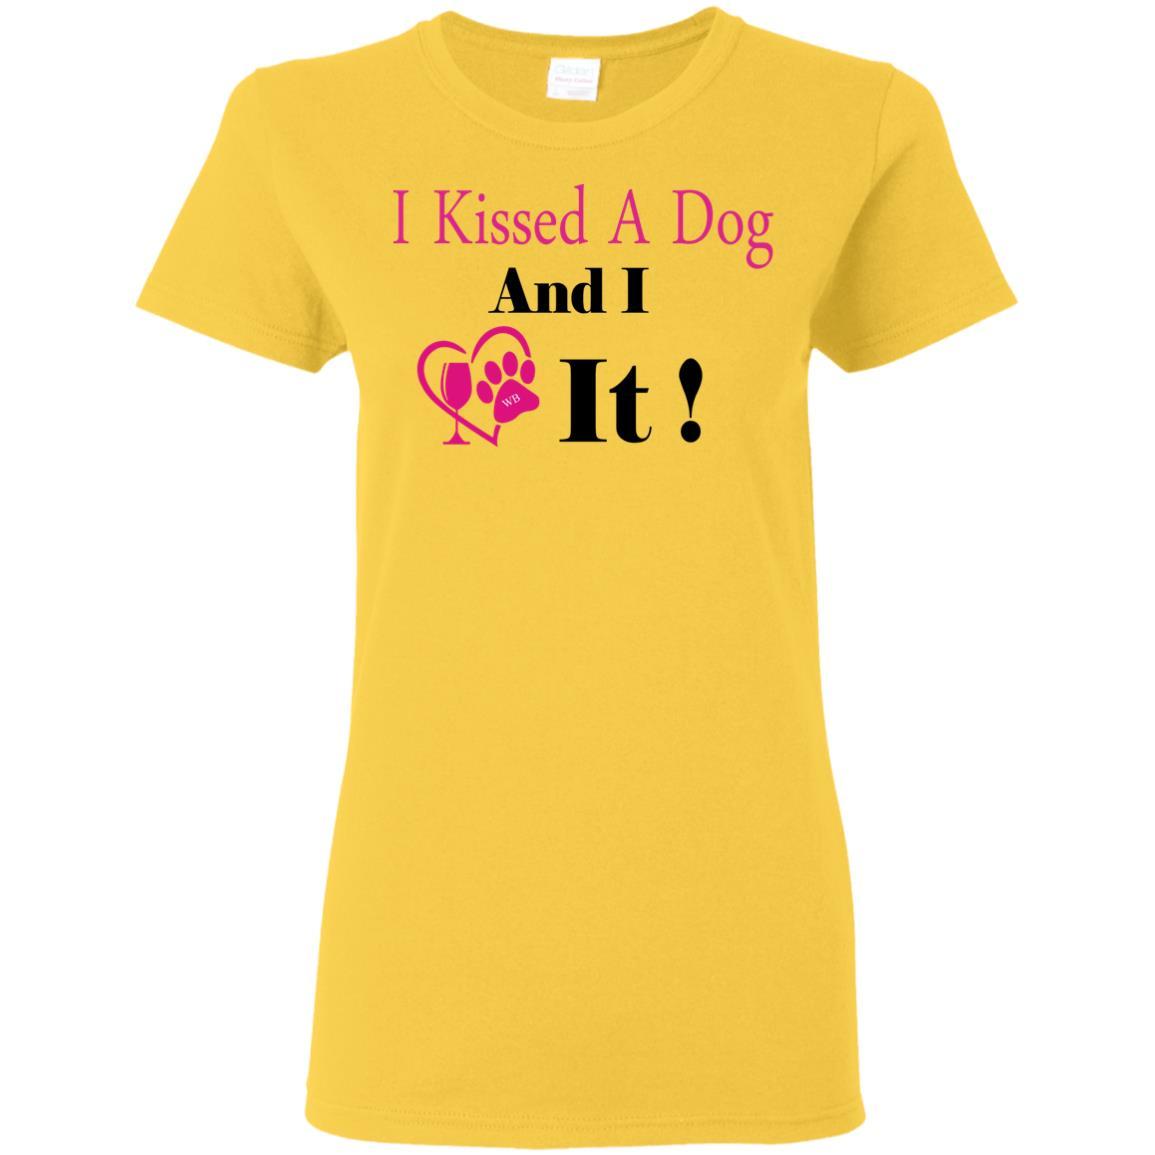 T-Shirts Daisy / S WineyBitches.co "I Kissed A Dog And I Loved It:" Ladies' 5.3 oz. T-Shirt WineyBitchesCo